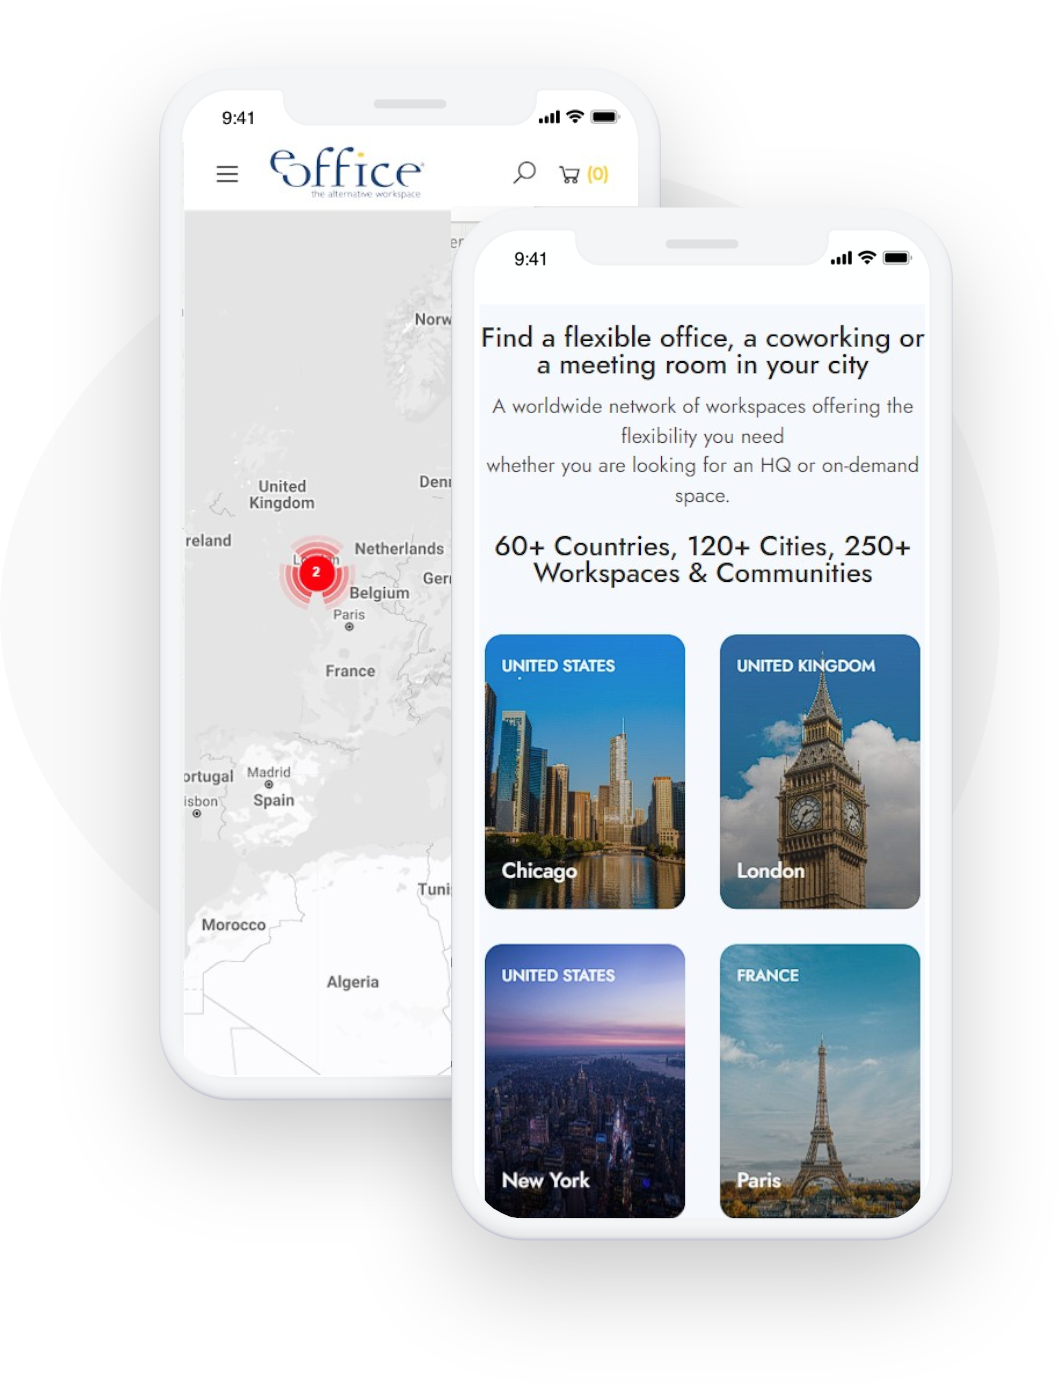 eoffice-net-location-page-mobile